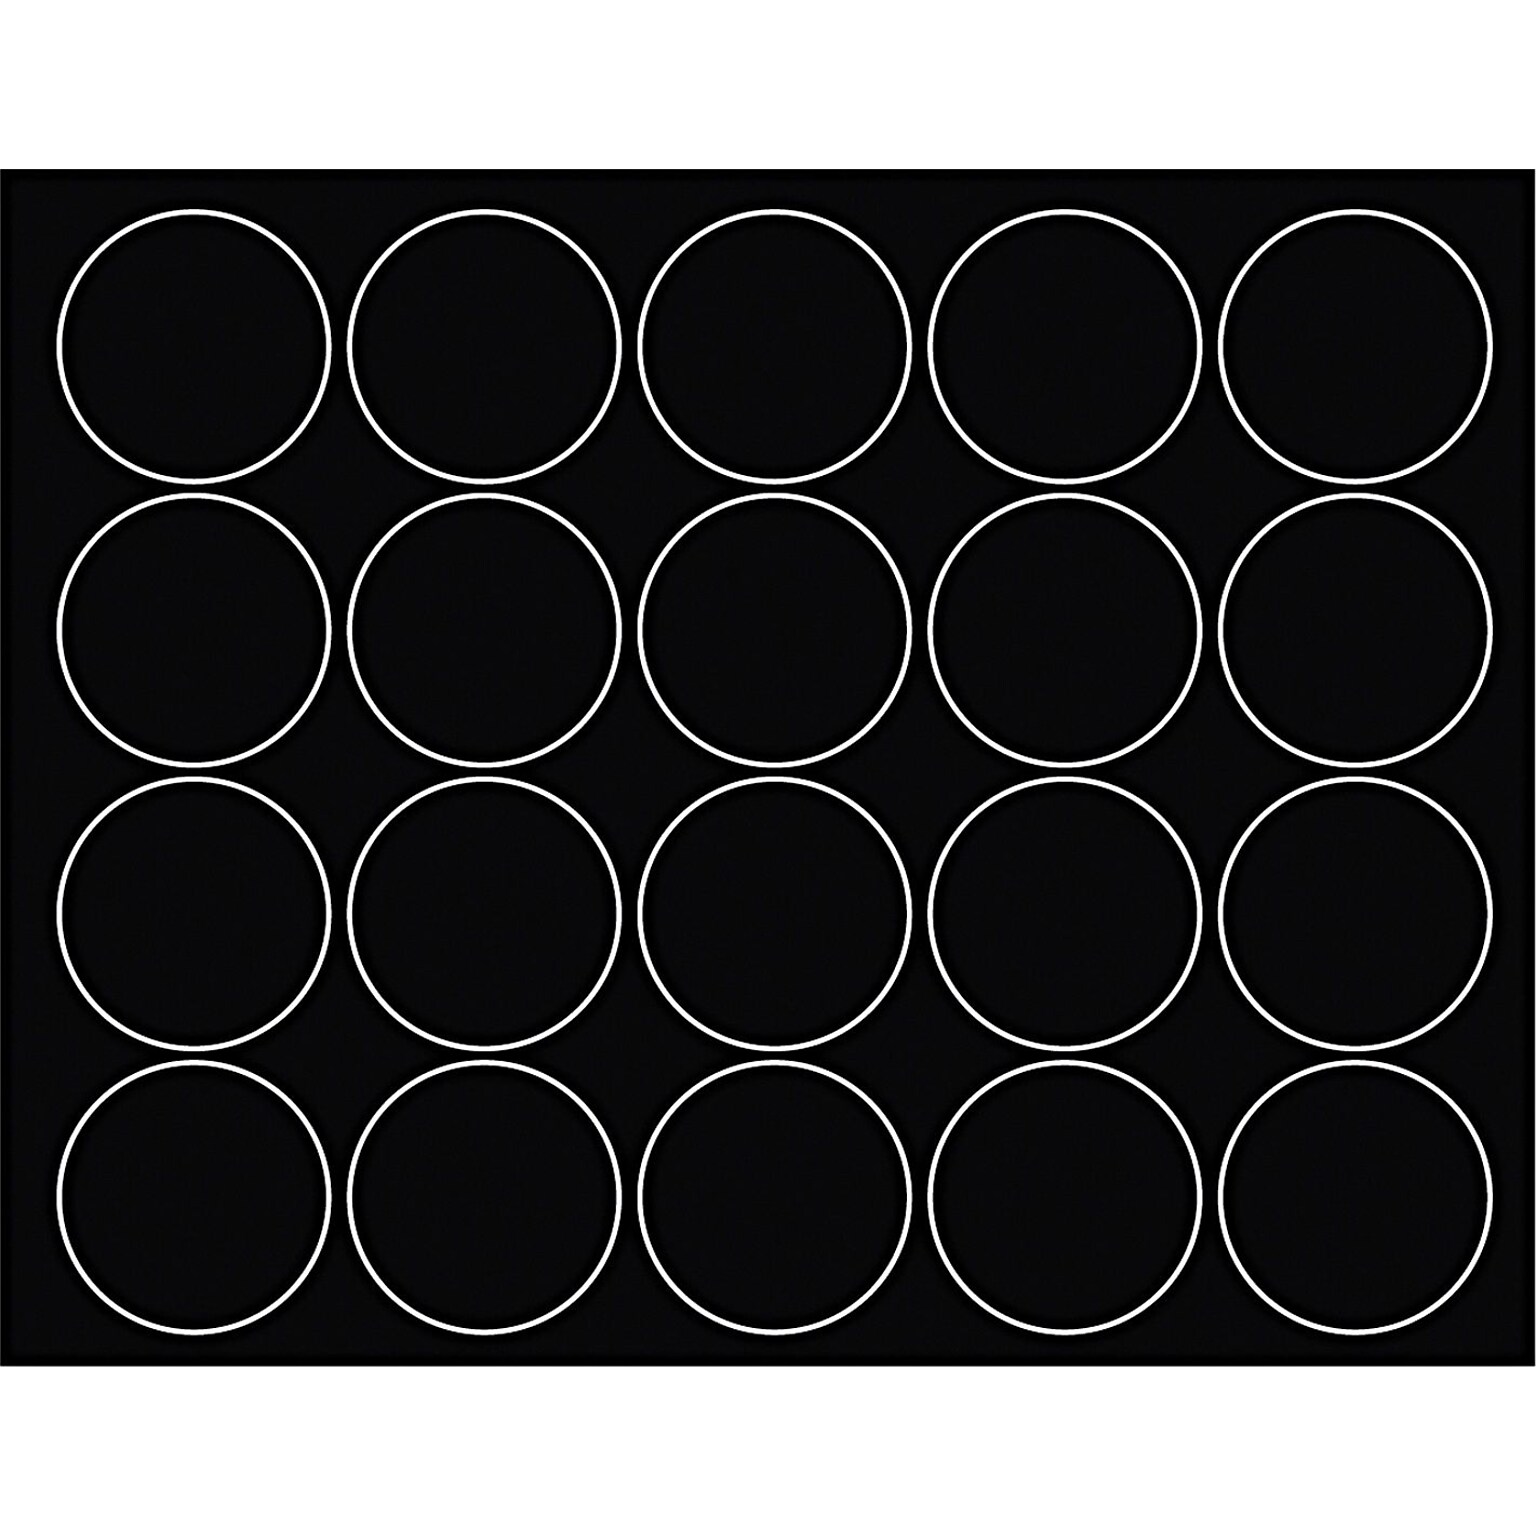 MasterVision Interchangeable Magnetic Character, Circles, Black, 20/Pk (FM1605)